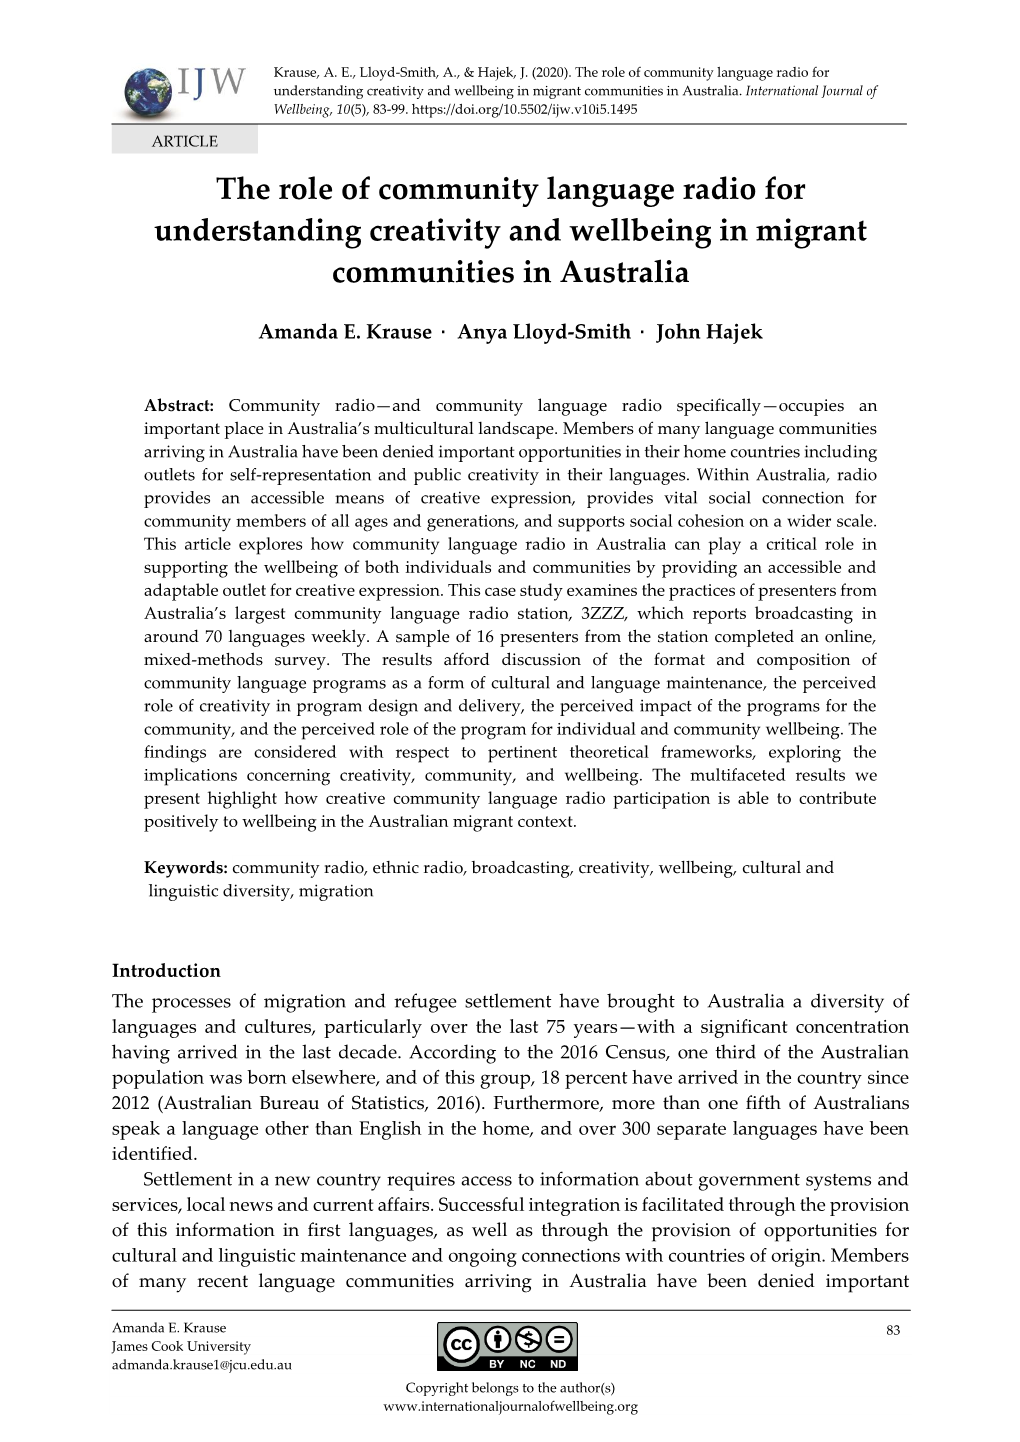 The Role of Community Language Radio for Understanding Creativity and Wellbeing in Migrant Communities in Australia